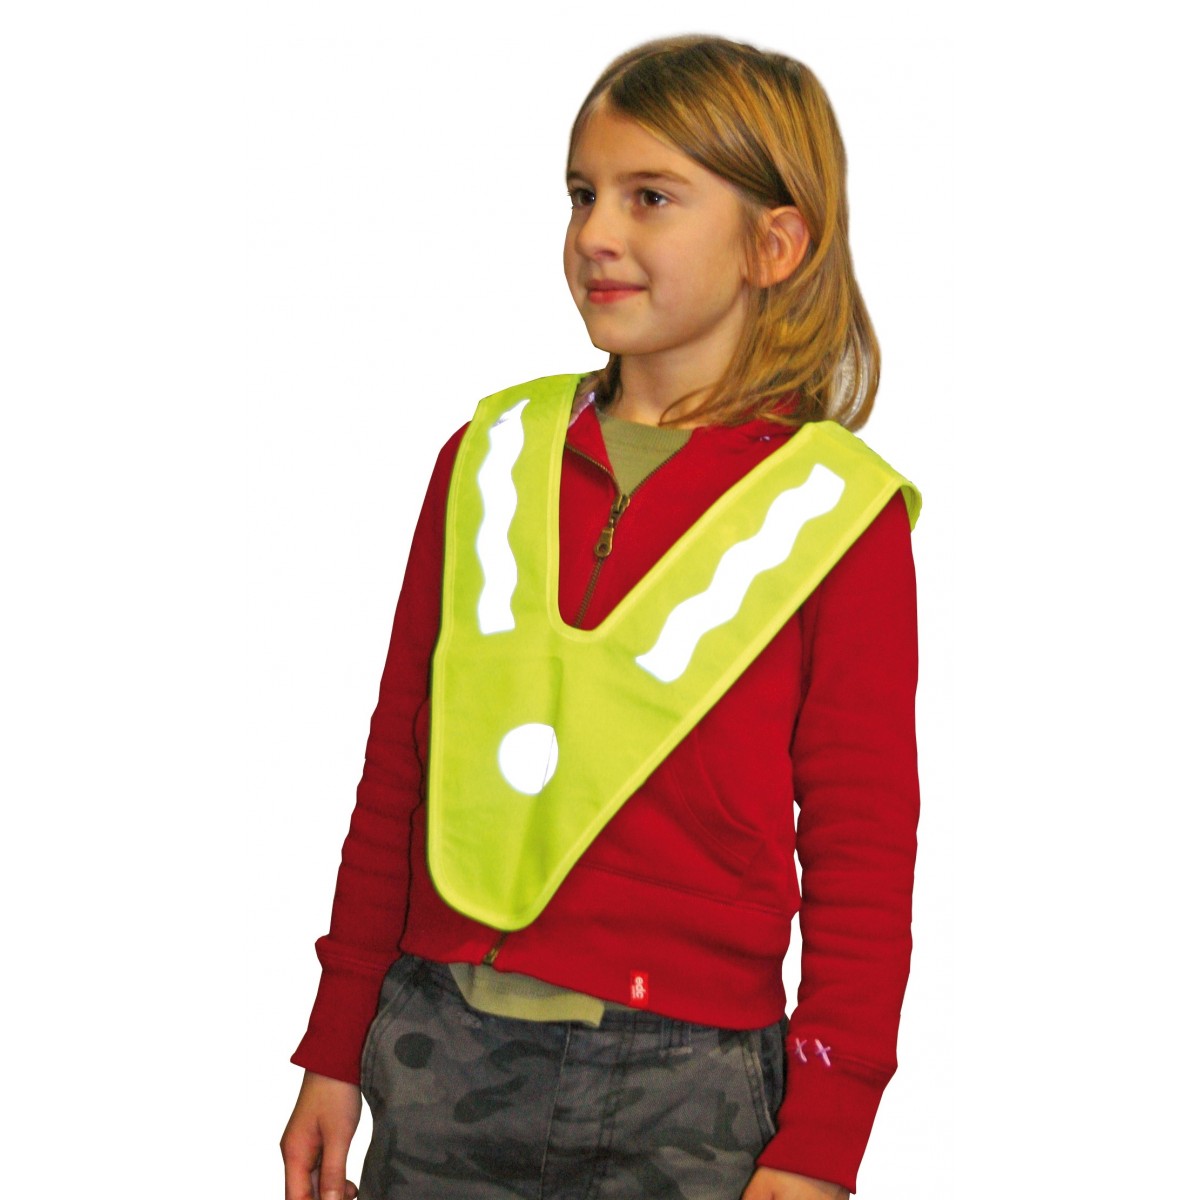 Safety collar with reflectors on front and back - 4,95